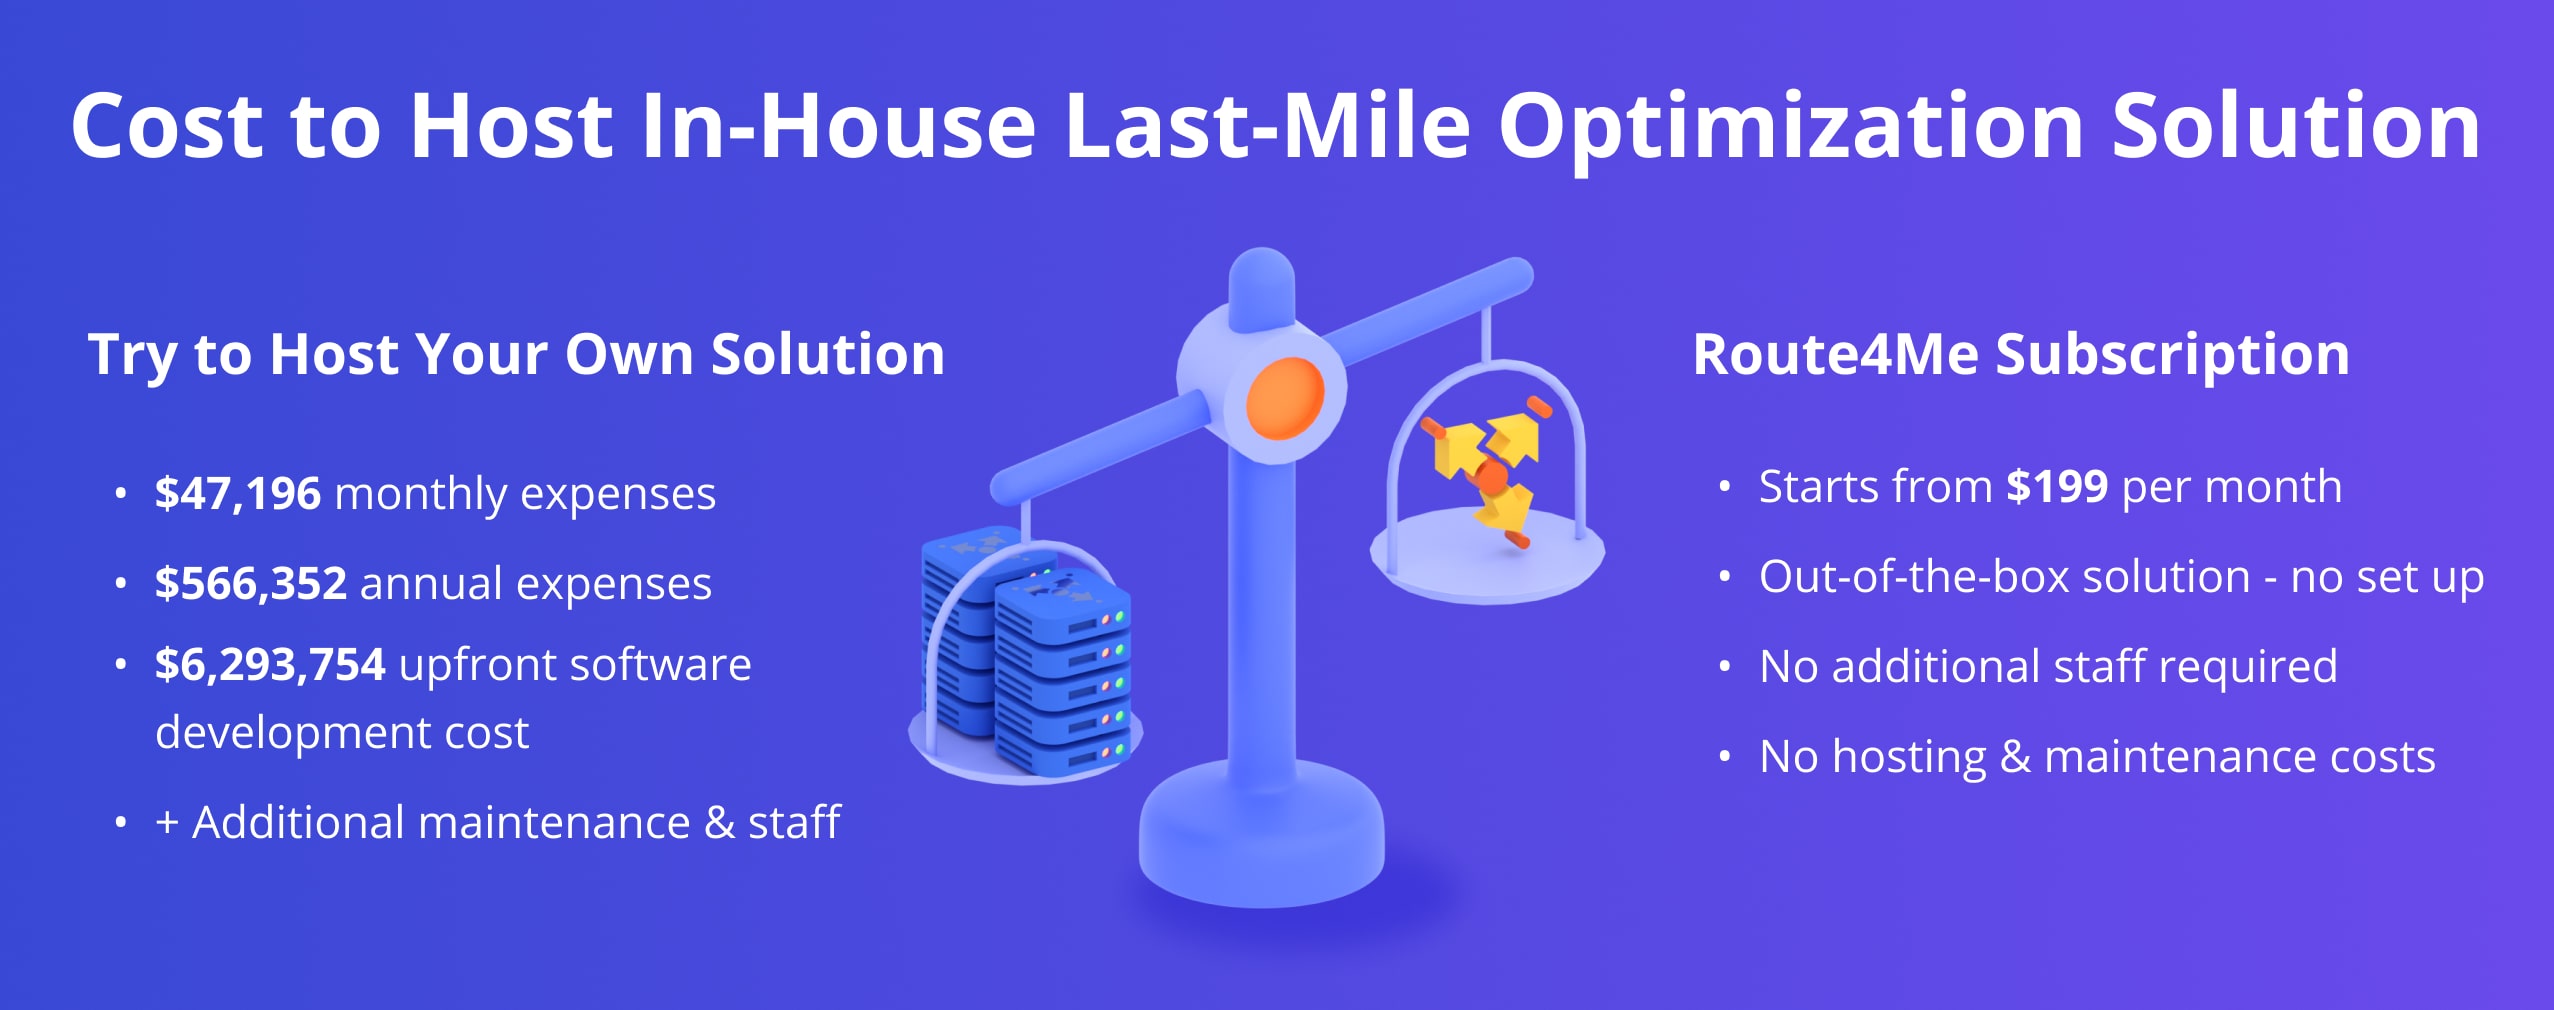 Expenses to develop, host, and run an in-house last-mile route optimization software solution like Route4Me.